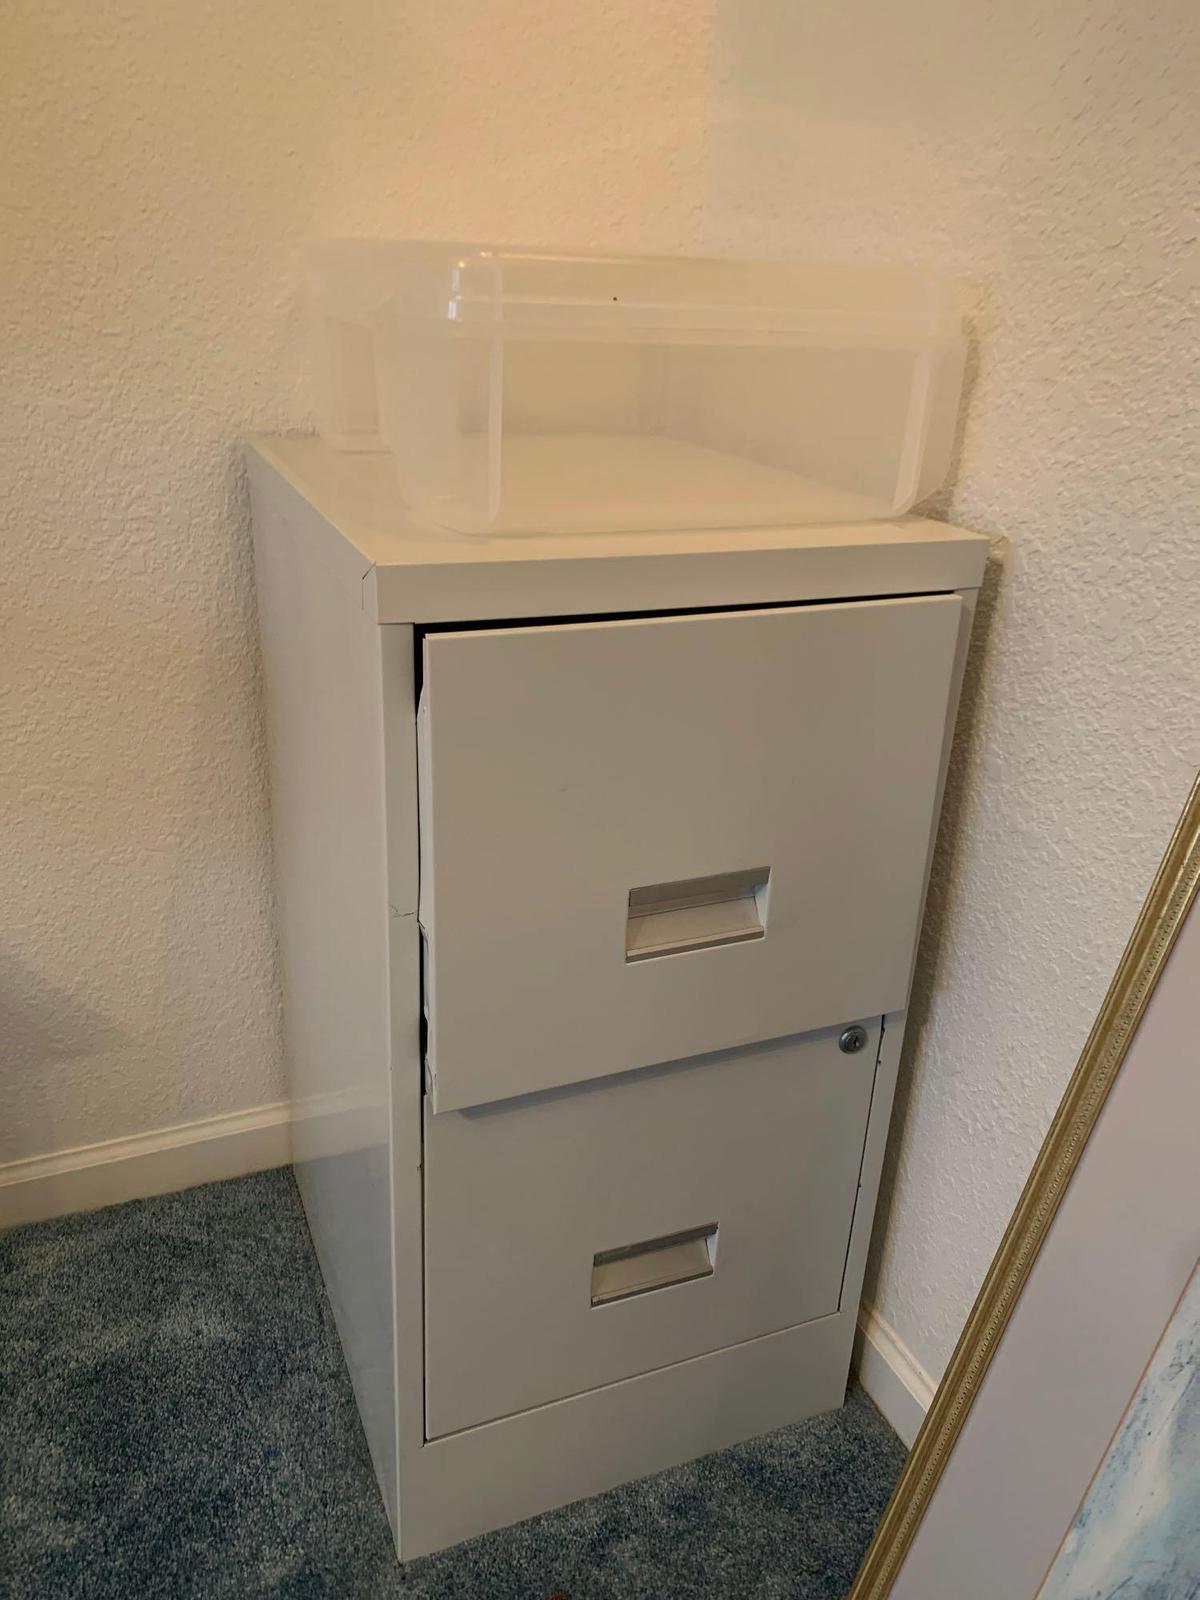 D1 Two drawer filing cabinet and storage box